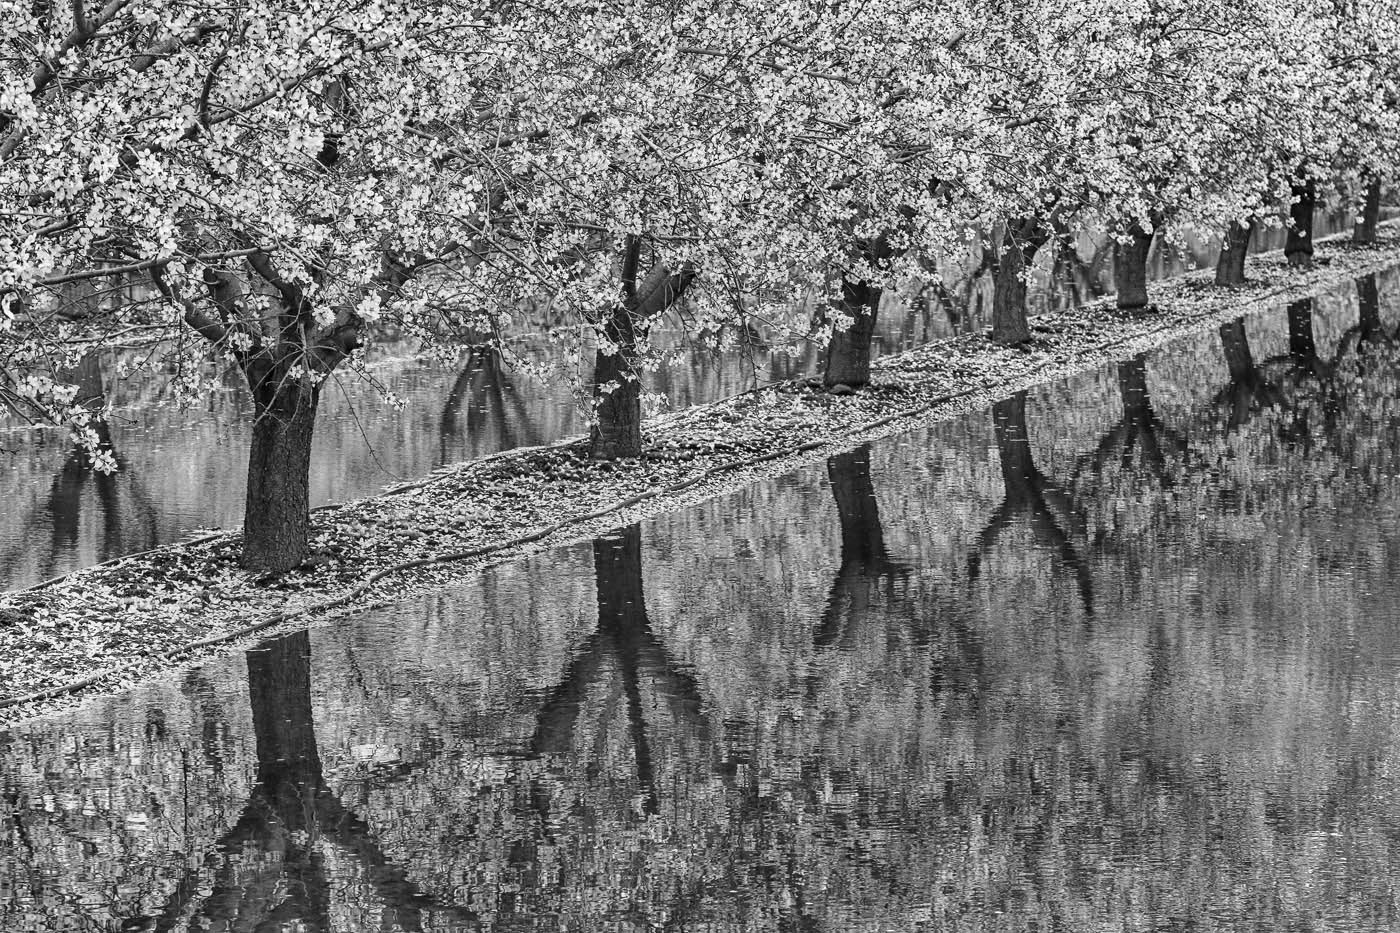 Flooded California Orchard by Jennifer Doerrie